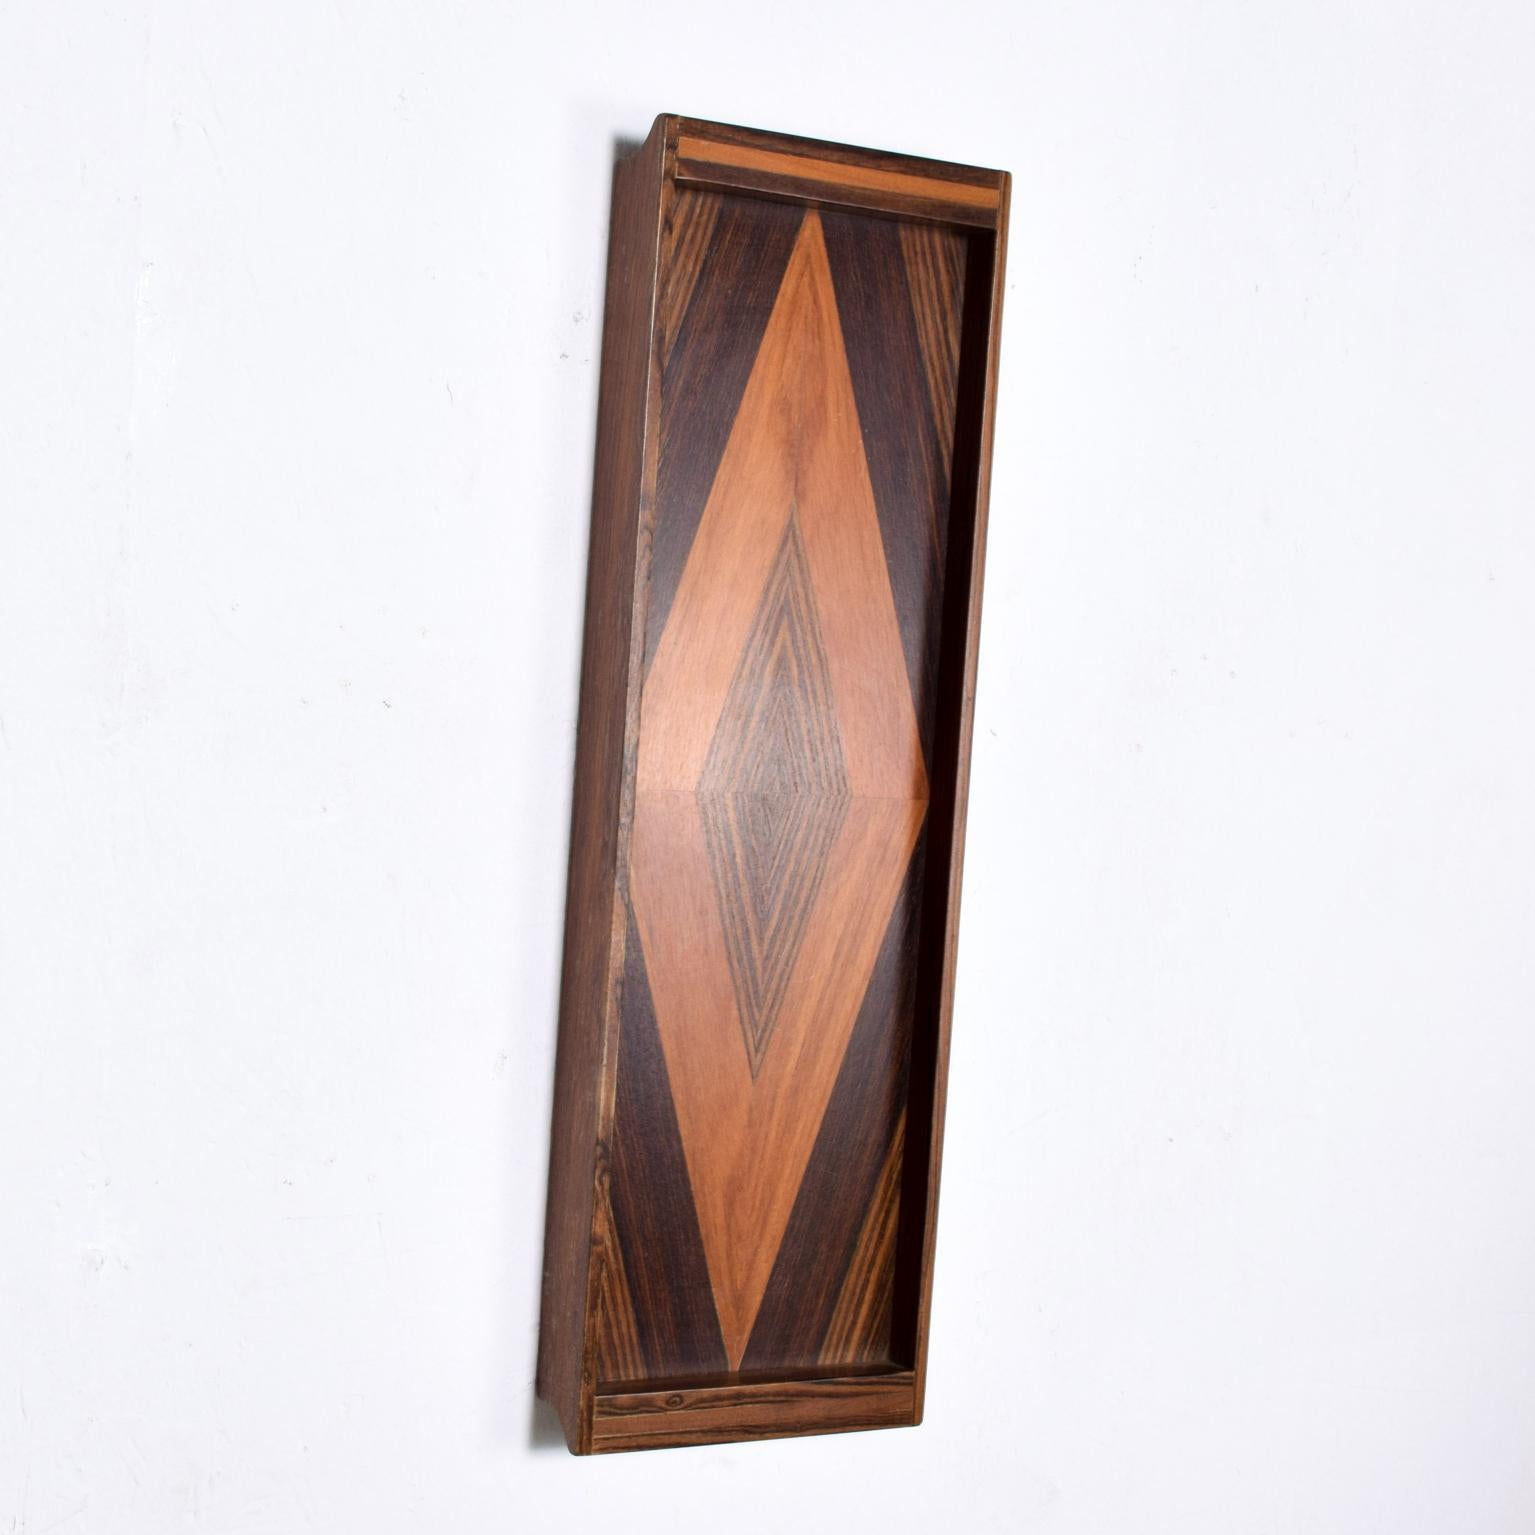 We are pleased to offer for your consideration a long and narrow service tray by Don S Shoemaker. Beautiful geometric woodwork with exotic woods. A small hole on the back of the tray allows easy hanging onto the wall. Retains label from the maker on